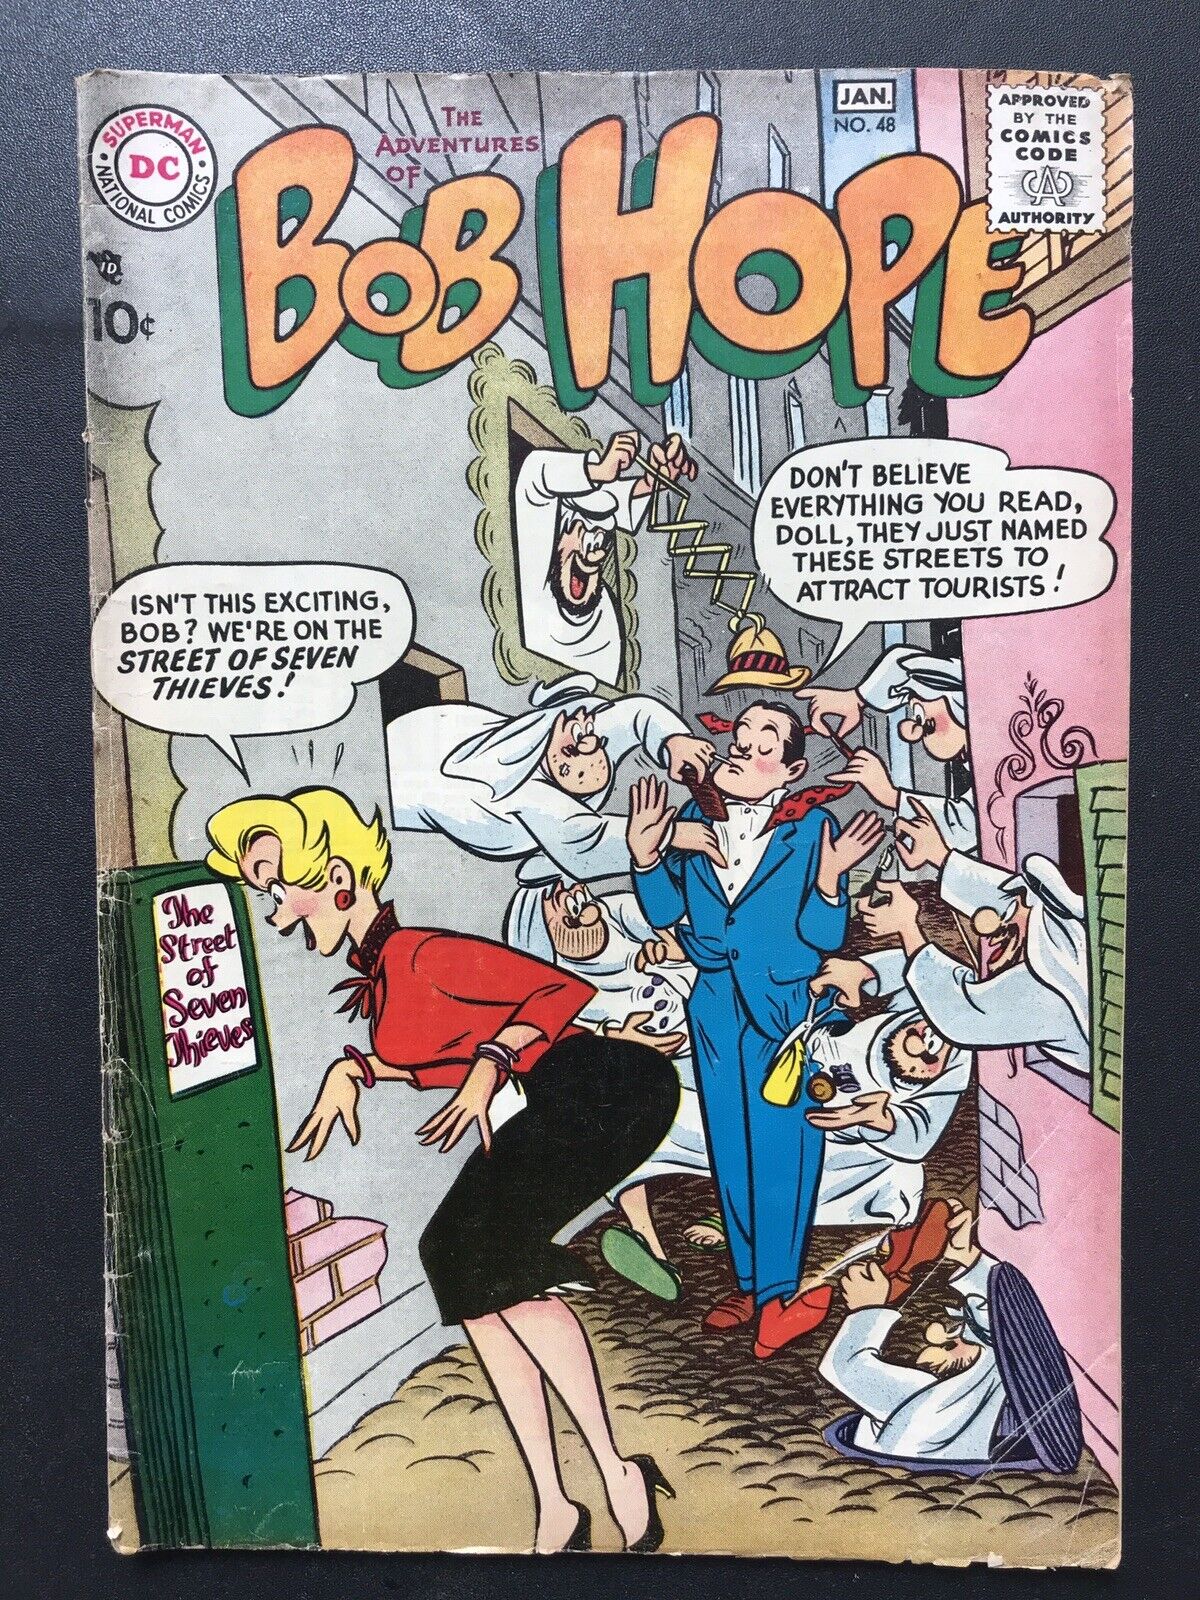 The Adventures of Bob Hope # 48. (DC 1957) ‘Good.’ Cover by Owen Fitzgerald.